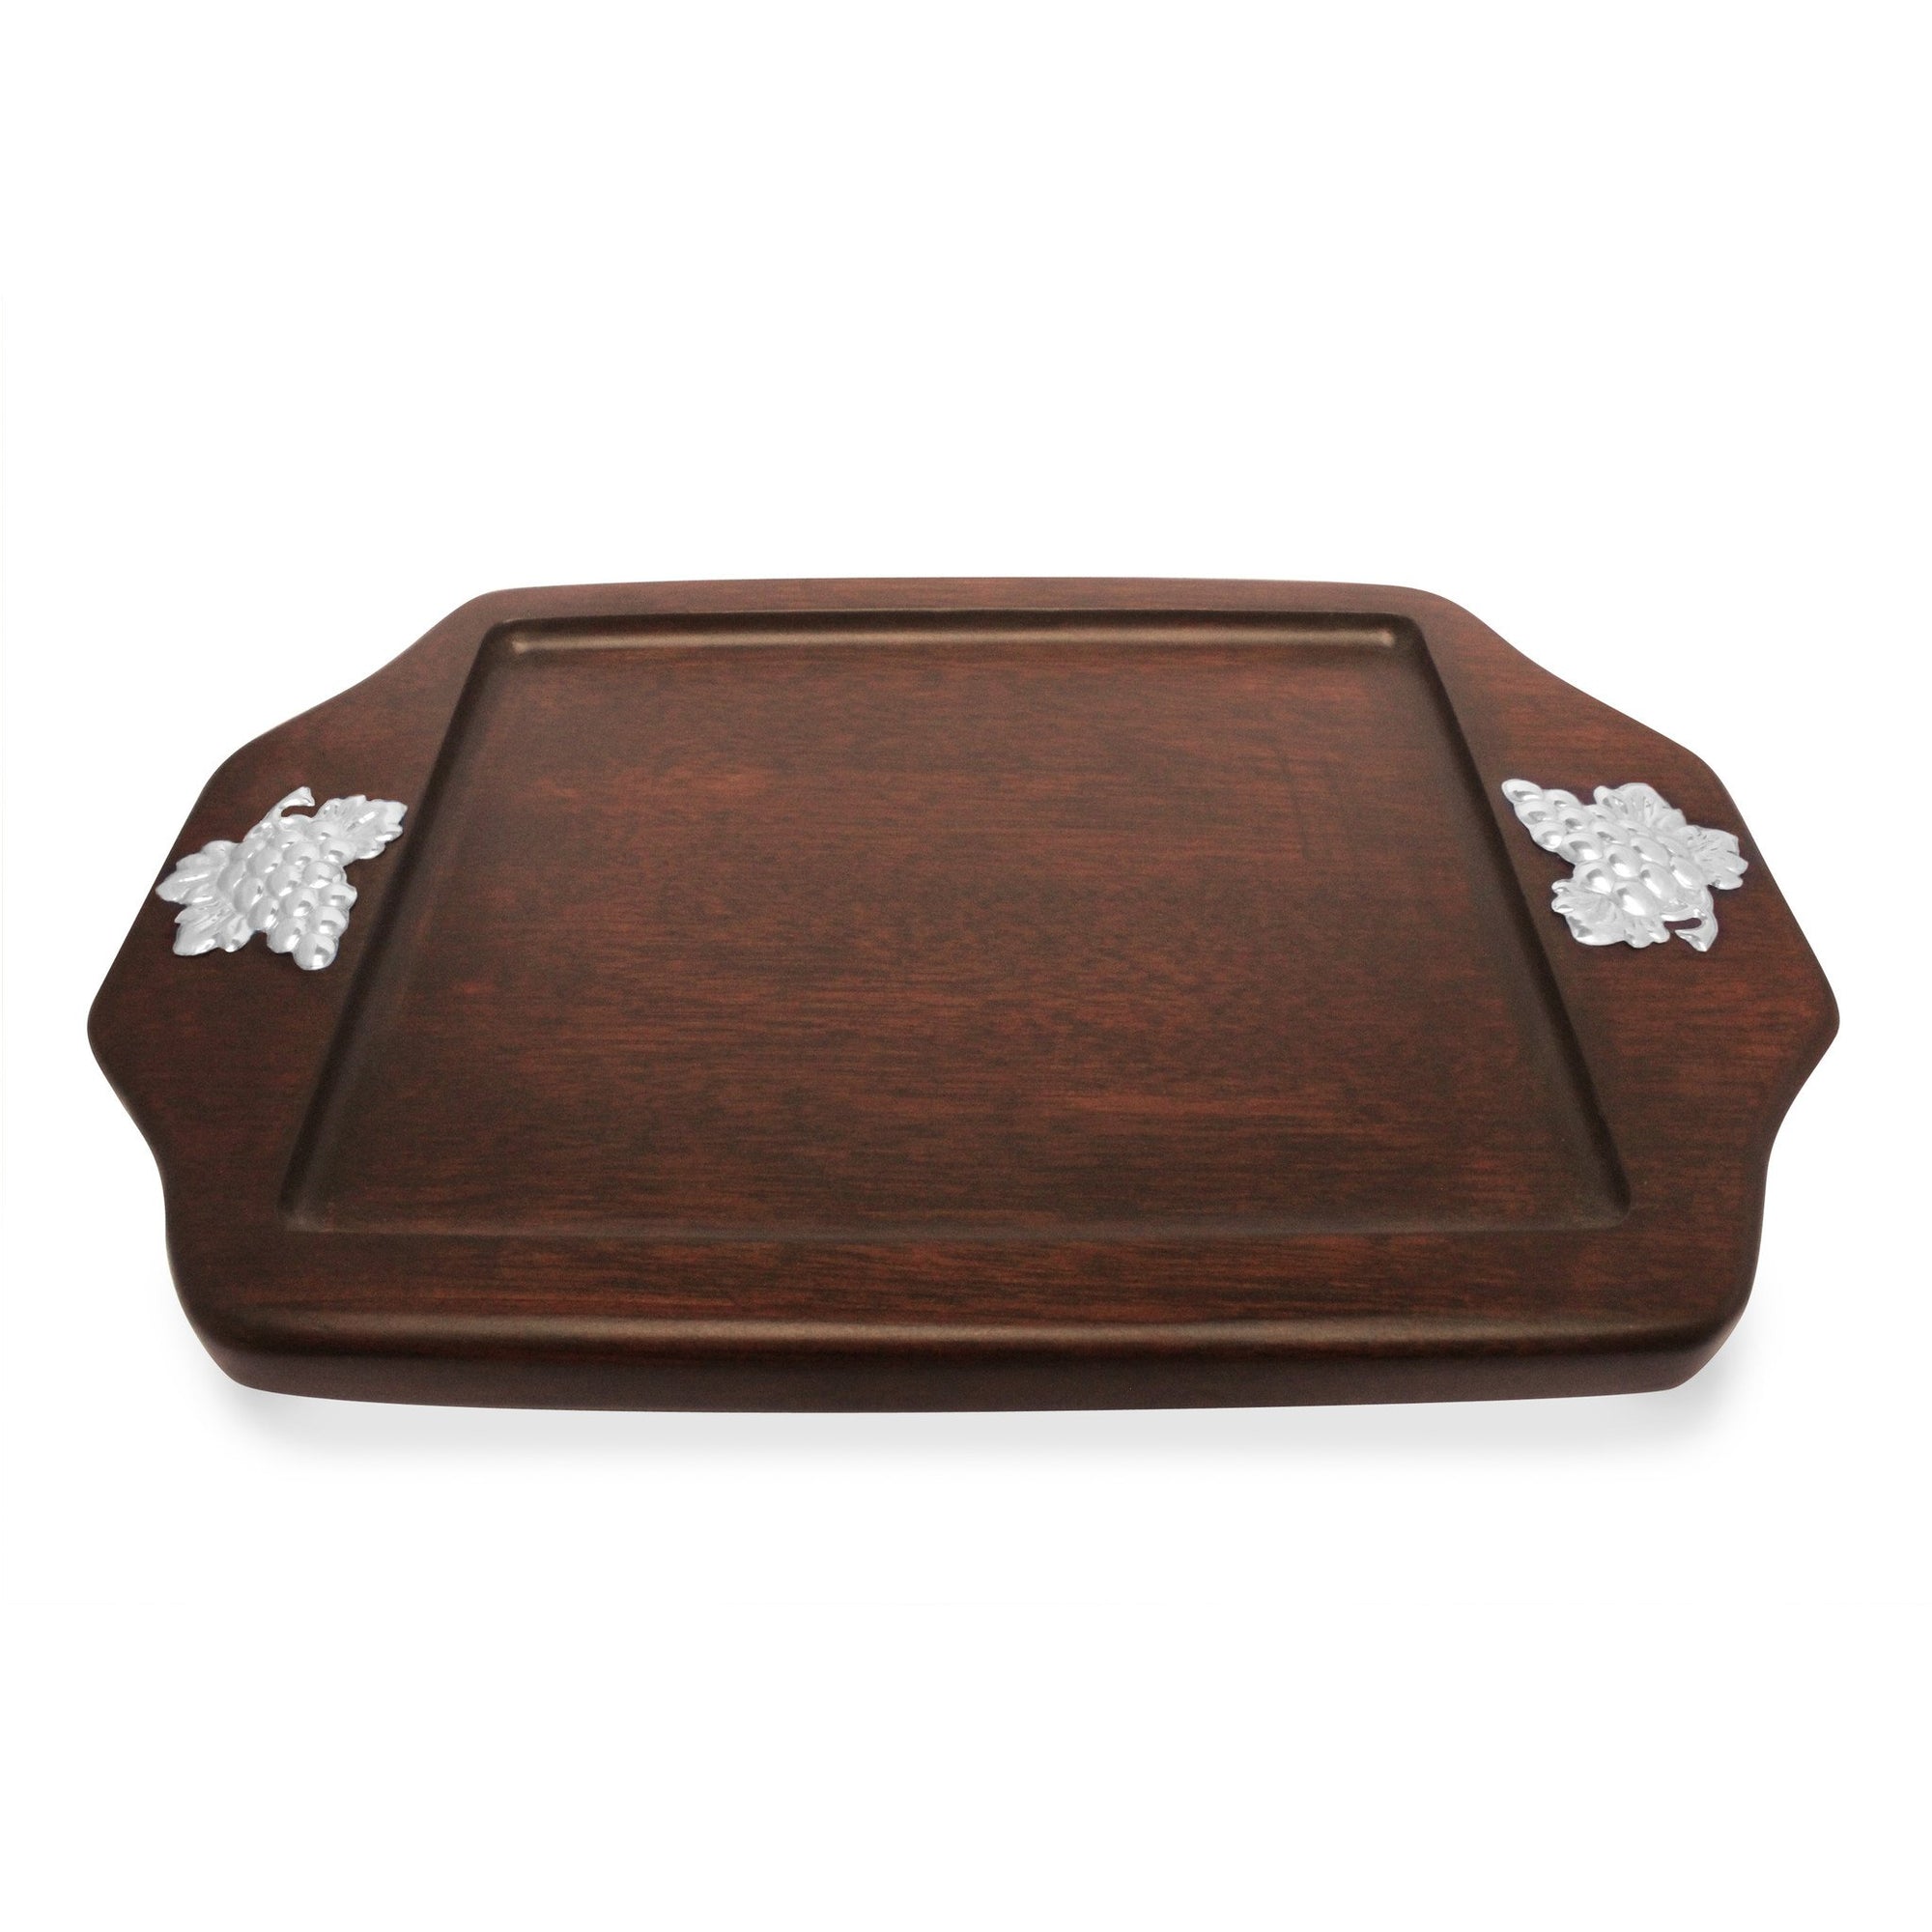 Serving Tray with Sterling Silver Grapes Accent - Qinti - The Peruvian Shop